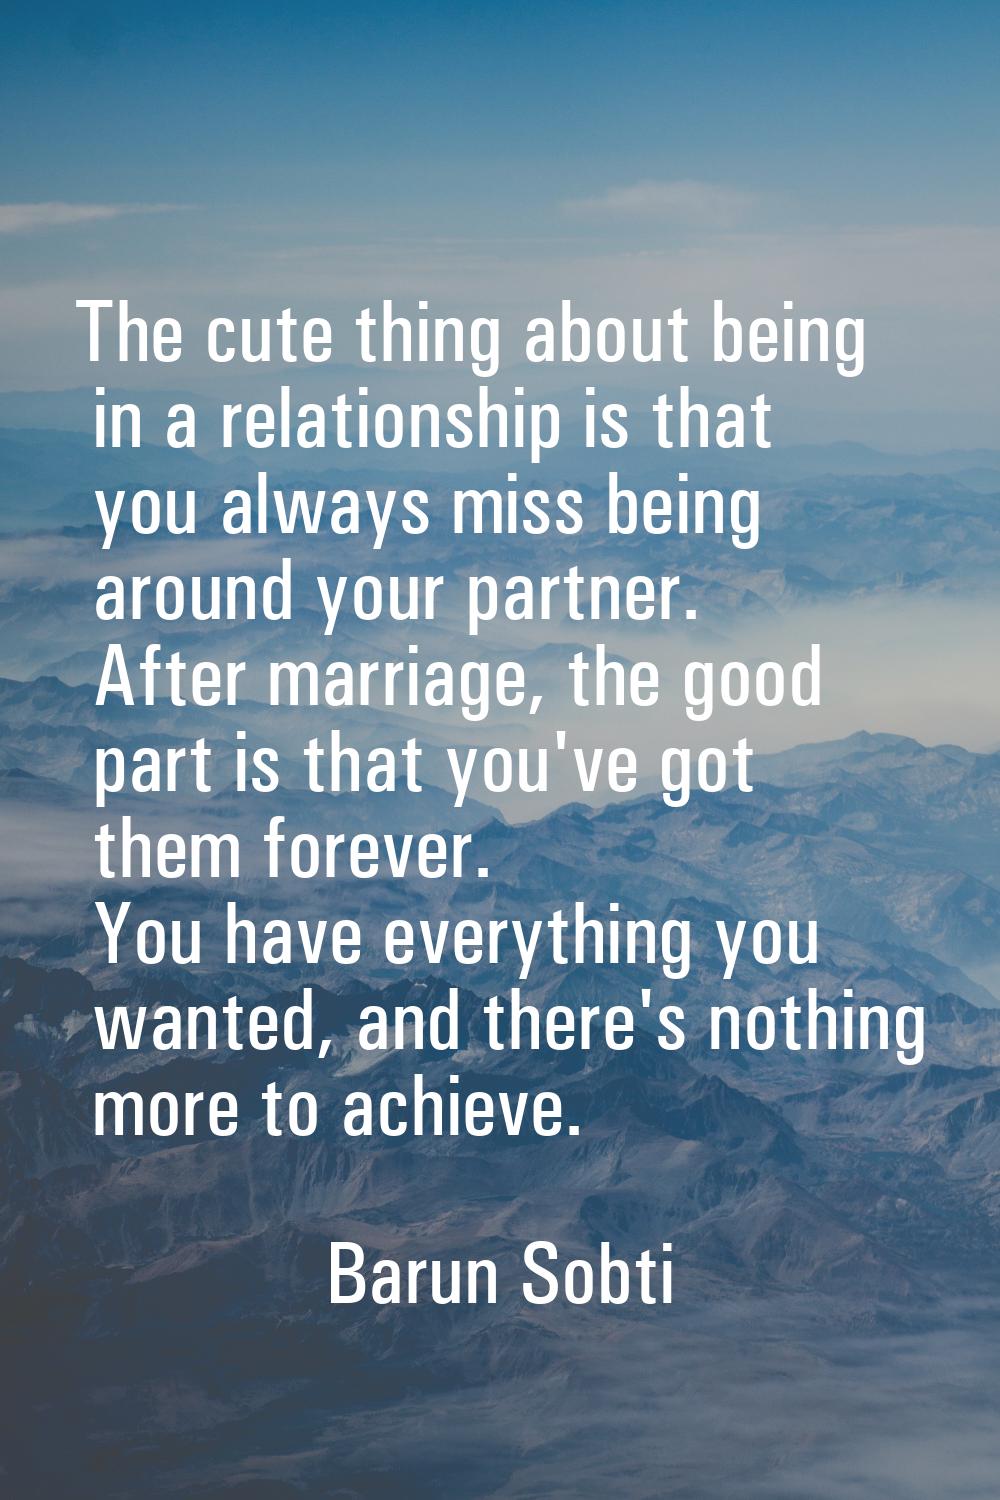 The cute thing about being in a relationship is that you always miss being around your partner. Aft